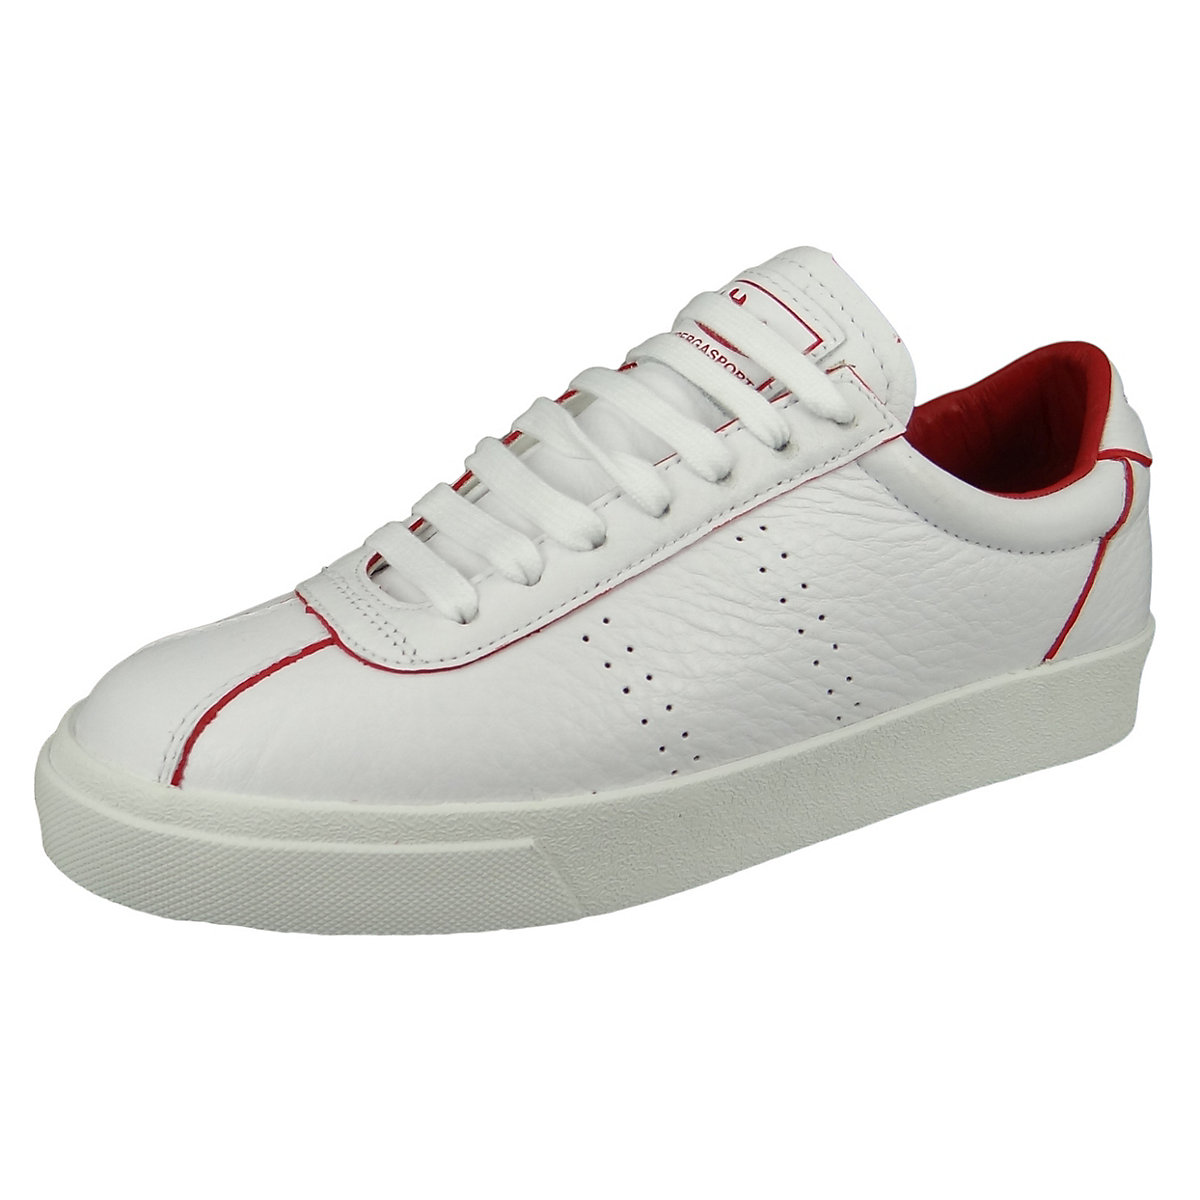 Superga® Damenschuhe-Sneaker S111WRW 2869 Club S Comfleau Painted Leder weiß A1Z White red Flame Sneakers Low weiß